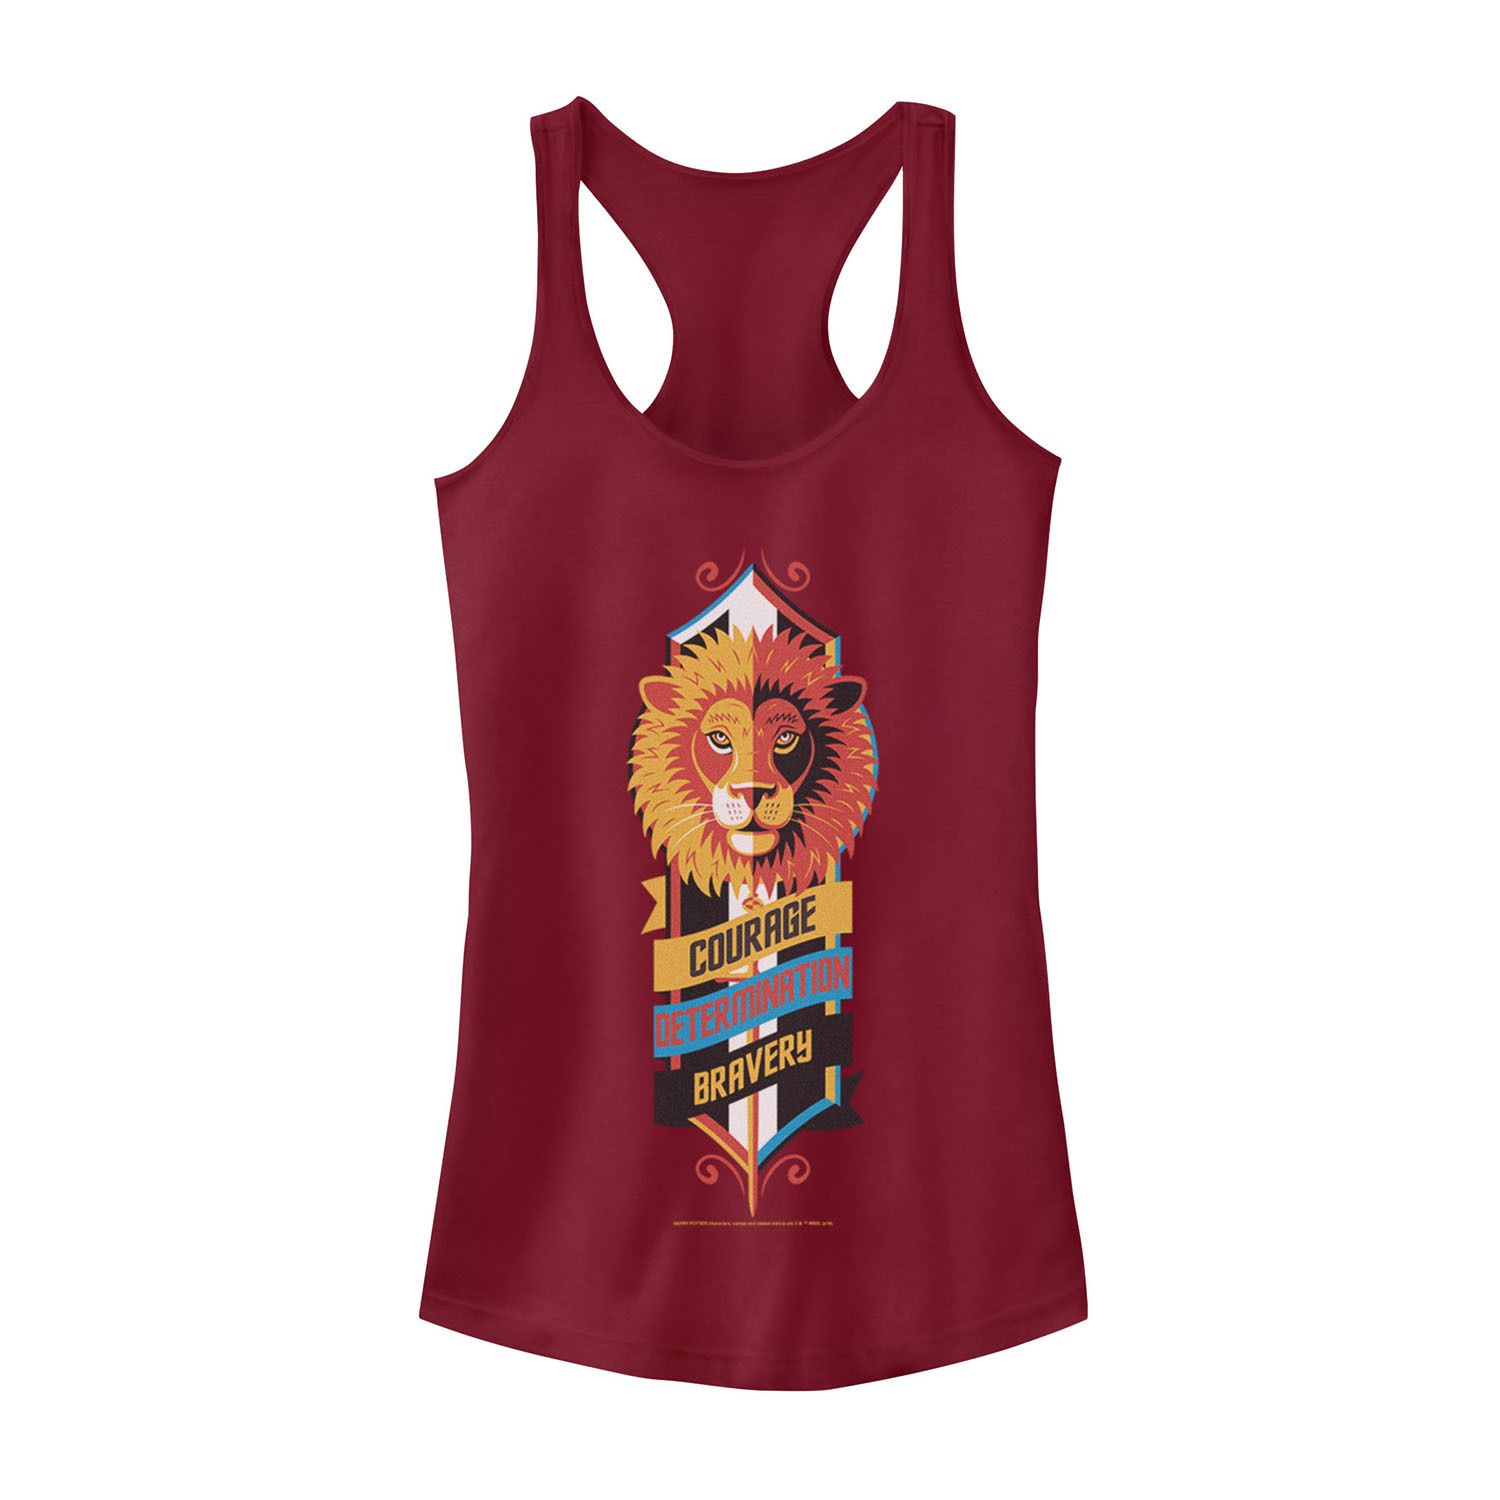 Image for Harry Potter Juniors' Gryffindor "Courage Determination Bravery" Tank Top at Kohl's.